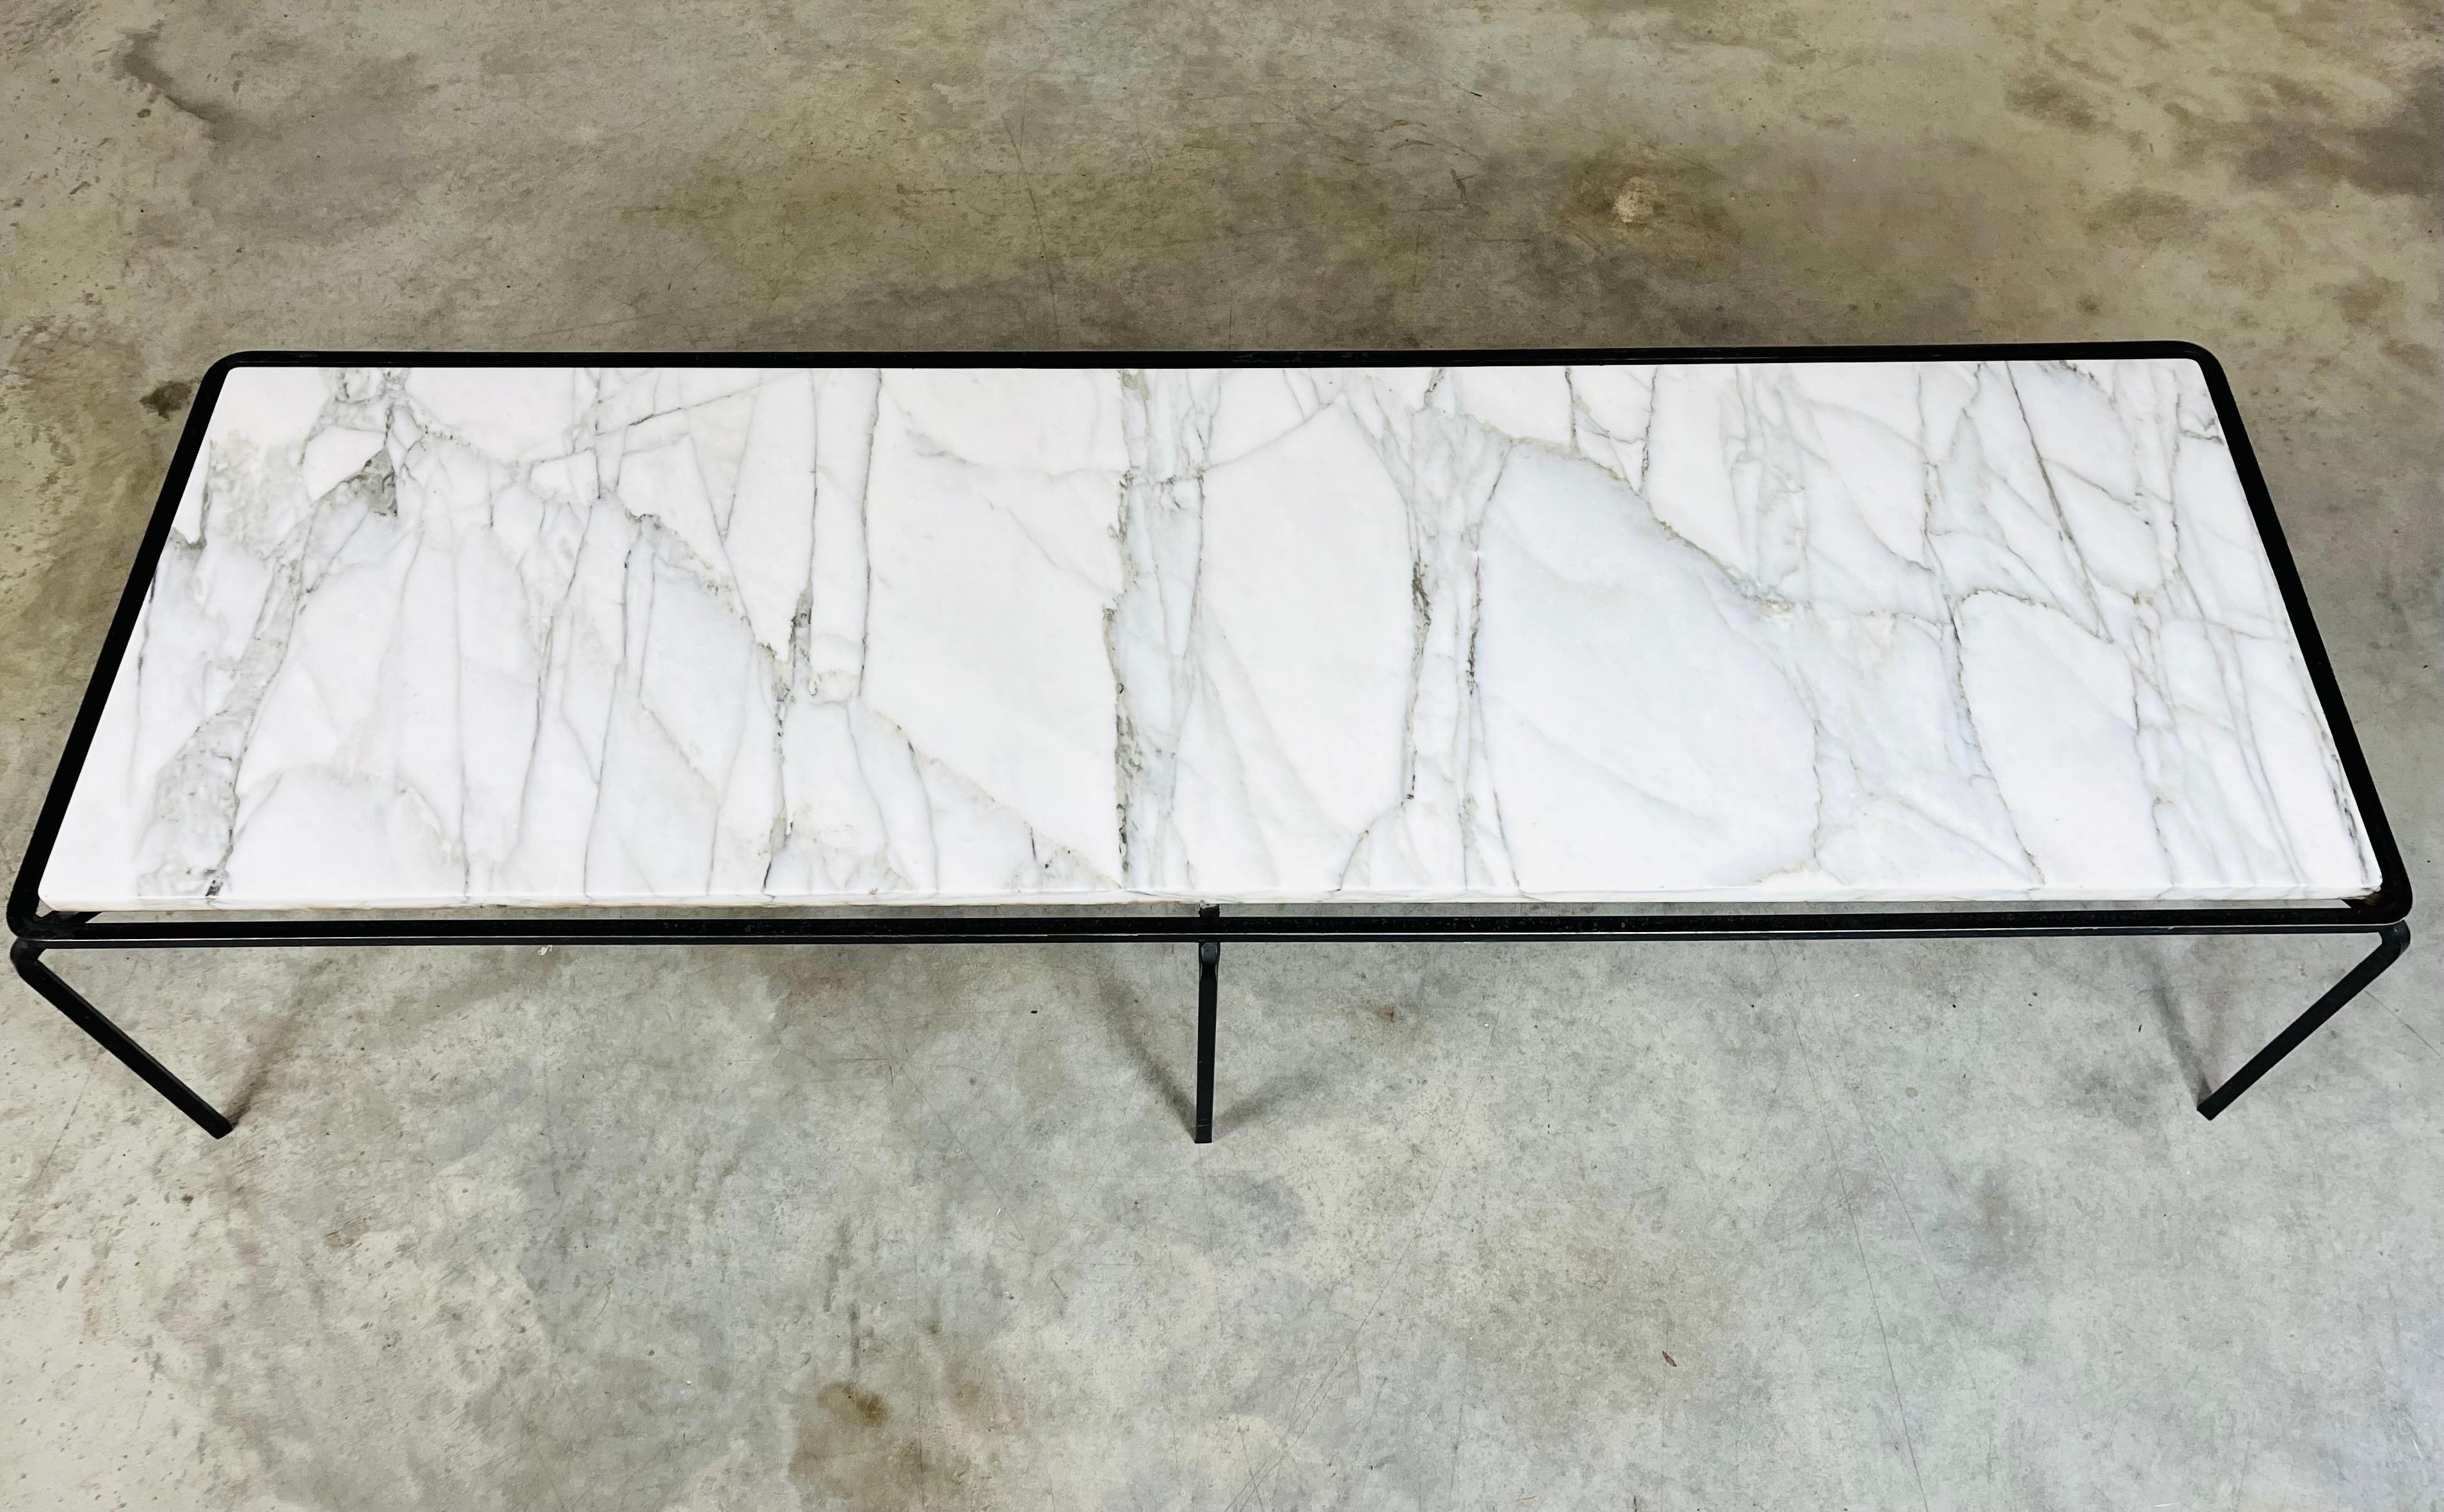 An elegant Carrara marble and black iron coffee table by Allan Gould and produced by Reilly-Wolff Associates, USA, 1950s.
In fabulous vintage condition having appropriate patina. Solid and sturdy. The marble has been polished, the frame carefully